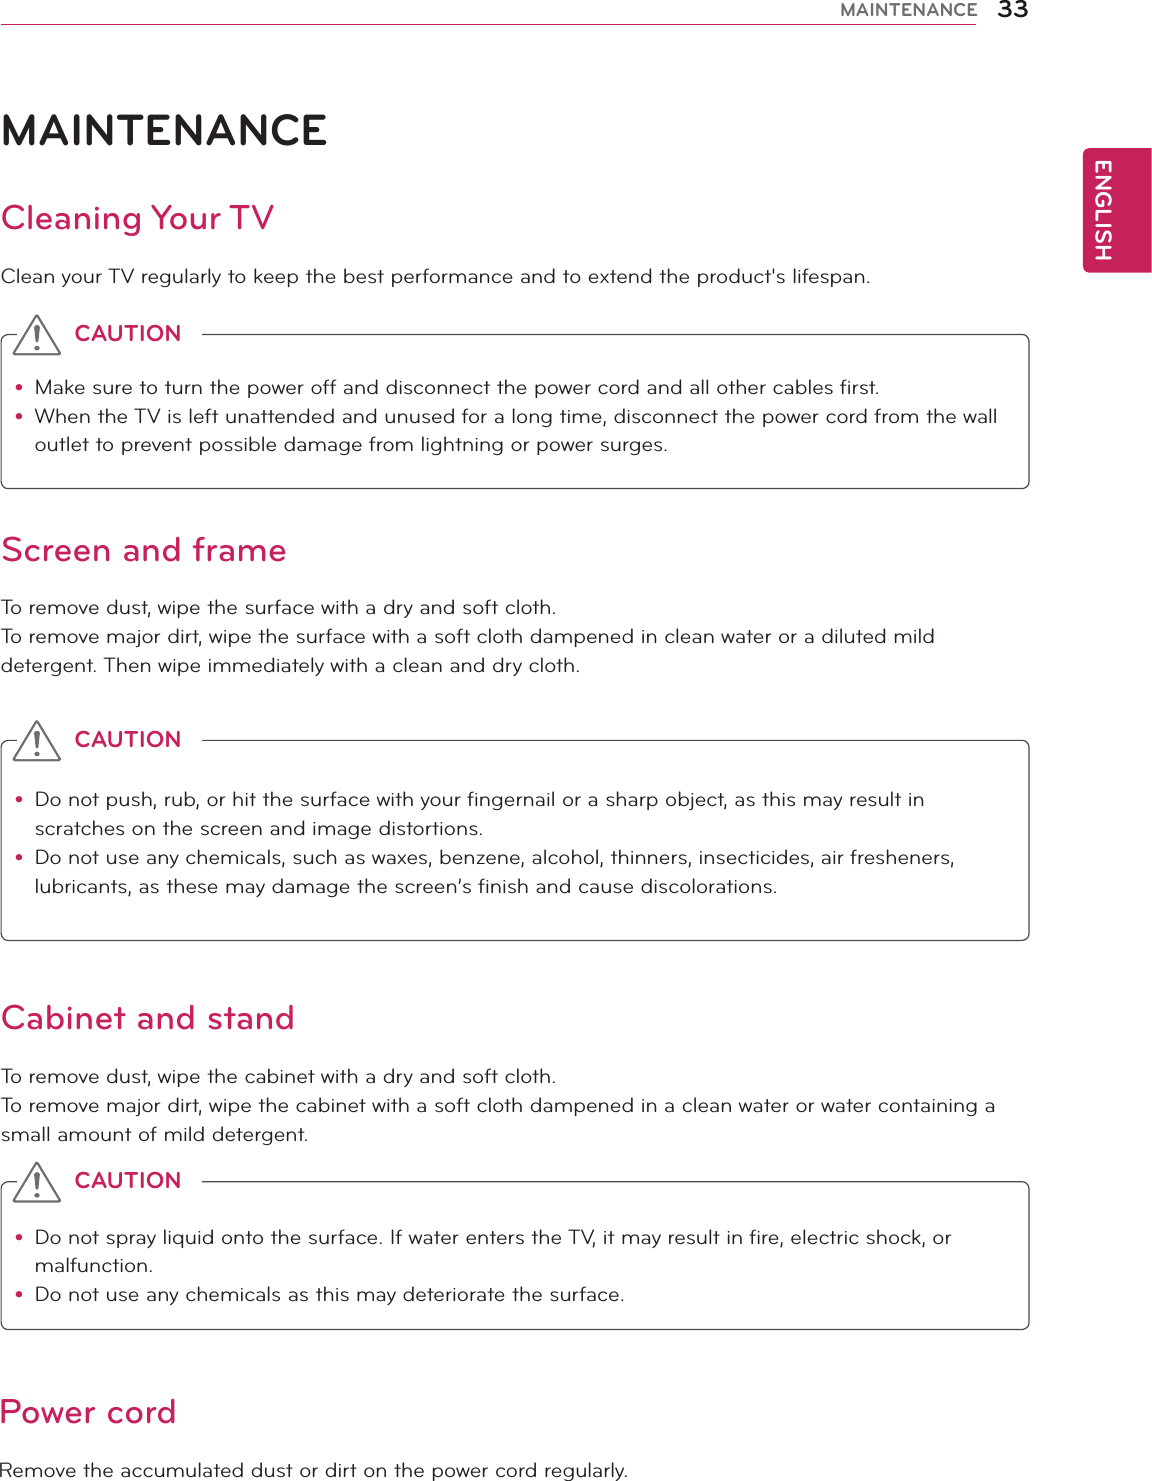 ENGLISH33MAINTENANCEMAINTENANCECleaning Your TVClean your TV regularly to keep the best performance and to extend the product&apos;s lifespan.Screen and frameTo remove dust, wipe the surface with a dry and soft cloth.To remove major dirt, wipe the surface with a soft cloth dampened in clean water or a diluted mild detergent. Then wipe immediately with a clean and dry cloth.Cabinet and standTo remove dust, wipe the cabinet with a dry and soft cloth.To remove major dirt, wipe the cabinet with a soft cloth dampened in a clean water or water containing a small amount of mild detergent.Power cordRemove the accumulated dust or dirt on the power cord regularly. y Make sure to turn the power off and disconnect the power cord and all other cables first.y When the TV is left unattended and unused for a long time, disconnect the power cord from the wall outlet to prevent possible damage from lightning or power surges.CAUTIONy Do not push, rub, or hit the surface with your fingernail or a sharp object, as this may result in scratches on the screen and image distortions.y Do not use any chemicals, such as waxes, benzene, alcohol, thinners, insecticides, air fresheners, lubricants, as these may damage the screen’s finish and cause discolorations.CAUTIONy Do not spray liquid onto the surface. If water enters the TV, it may result in fire, electric shock, or malfunction.y Do not use any chemicals as this may deteriorate the surface.CAUTION